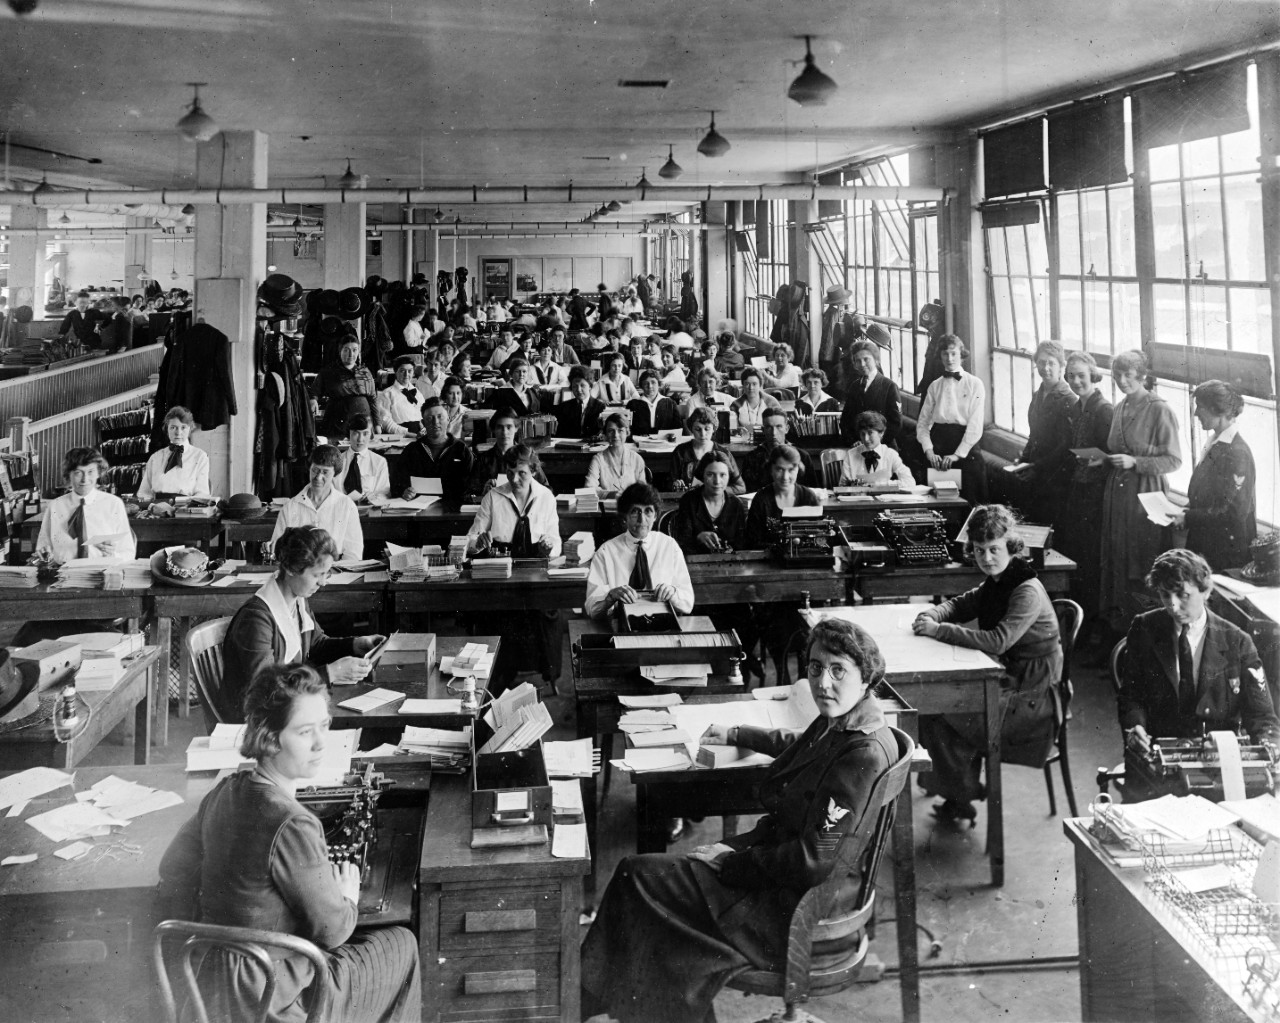 Long view of a building interior with personnel sitting at desks and standing. 